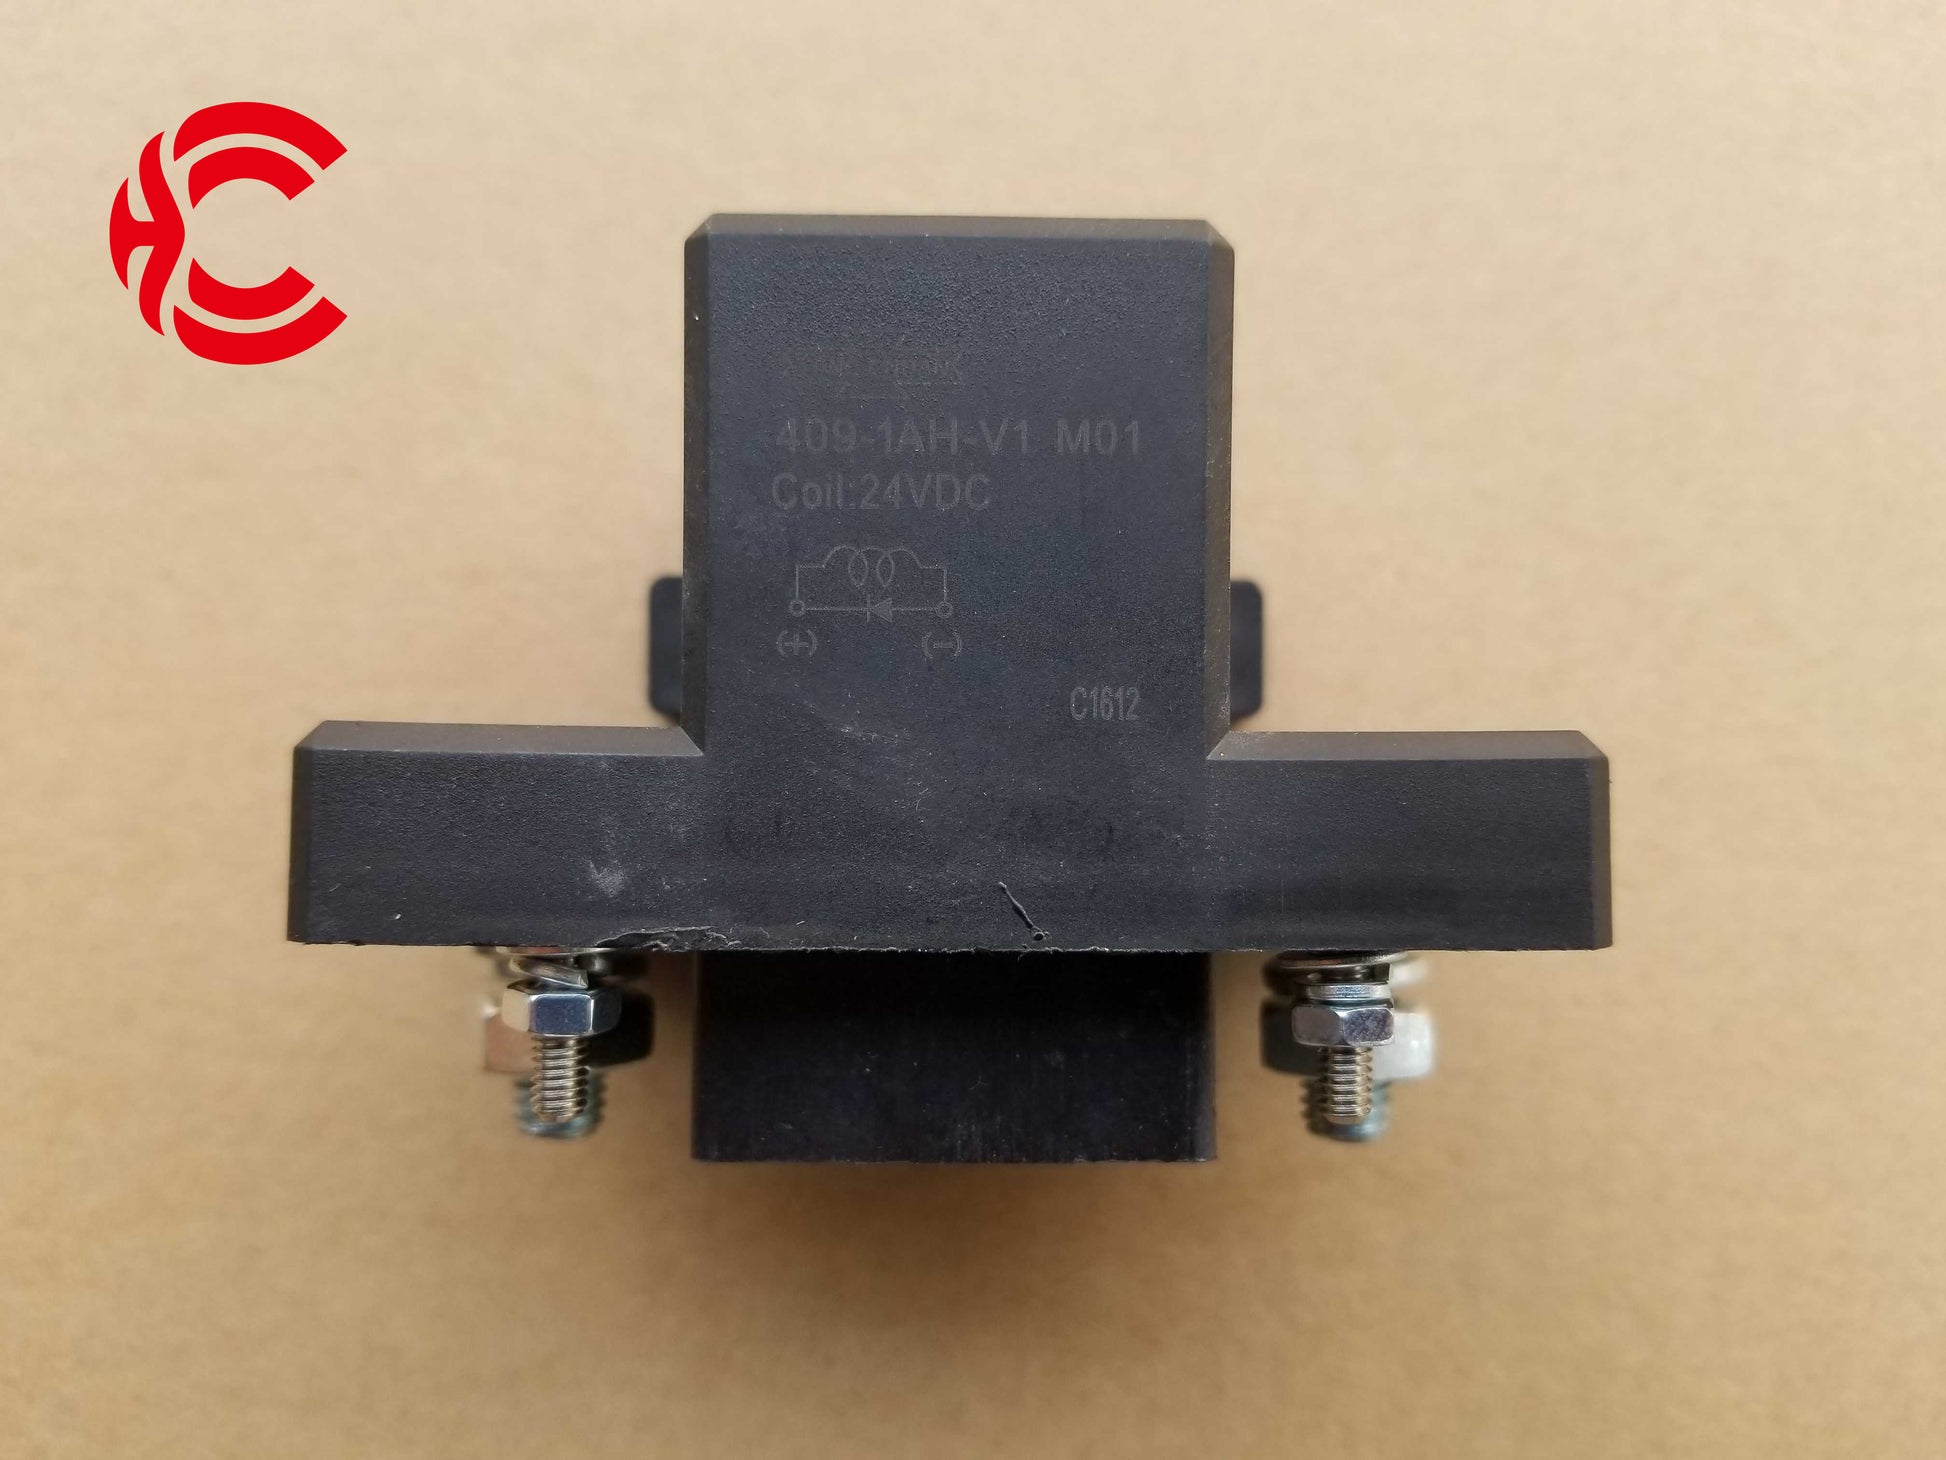 OEM: 409-1AH-V1 200A 24VMaterial: ABS metalColor: black silverOrigin: Made in ChinaWeight: 300gPacking List: 1* Direct Current(DC) Contactor More ServiceWe can provide OEM Manufacturing serviceWe can Be your one-step solution for Auto PartsWe can provide technical scheme for you Feel Free to Contact Us, We will get back to you as soon as possible.